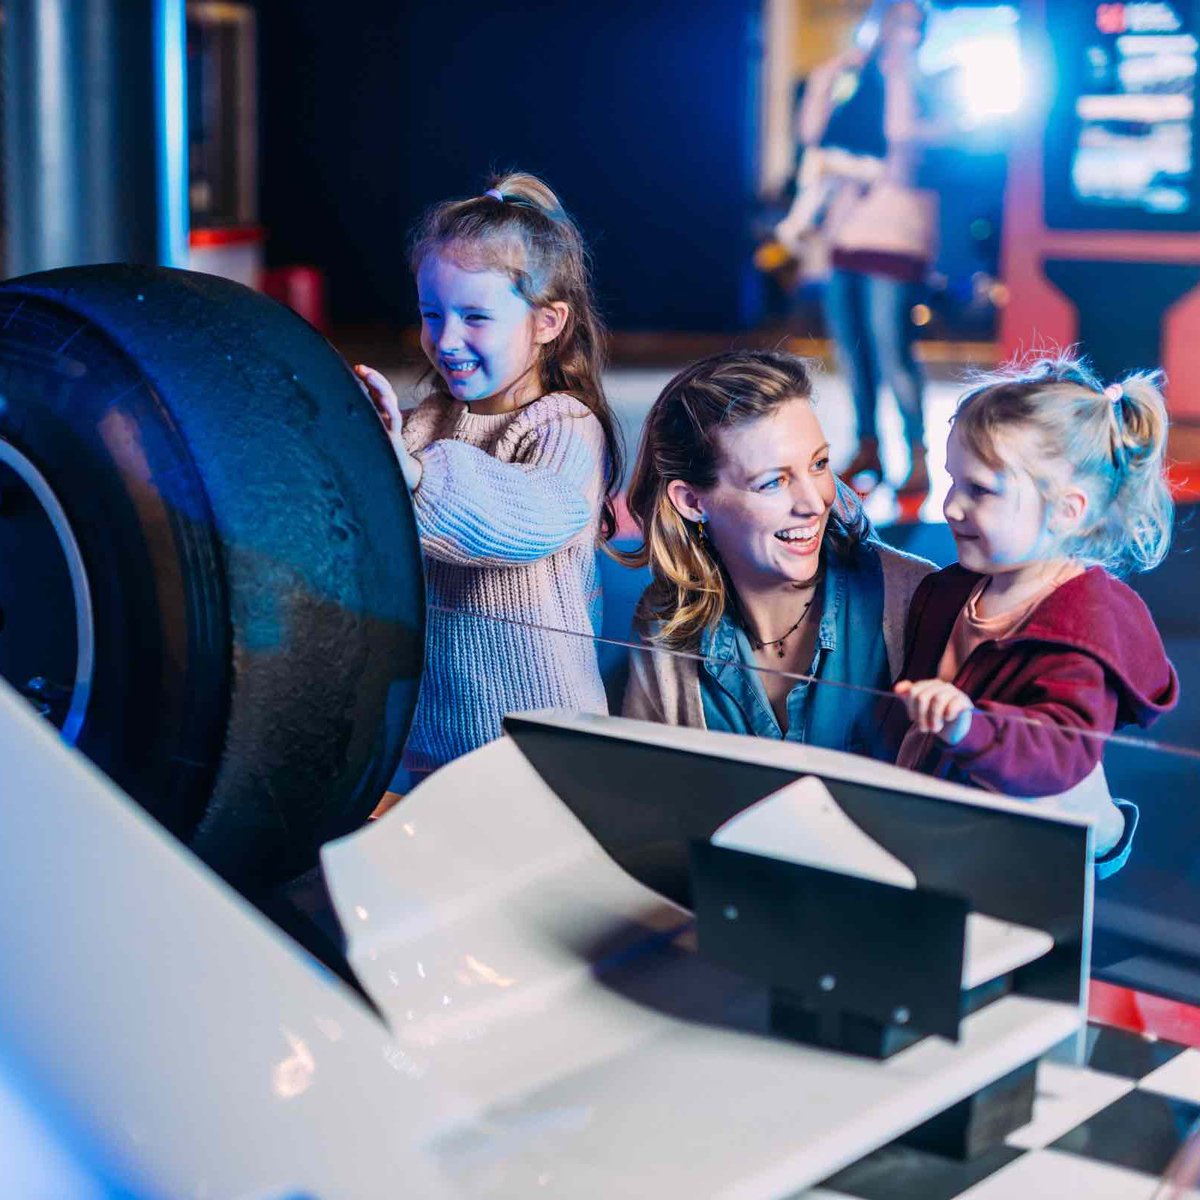 Step into a world of wonder at W5! ⭐️ Check out our opening hours for this week ⤵ ⚡️ Monday & Tuesday: Closed ⚡️ Wednesday & Thursday: 10am - 4pm ⚡️ Friday - Sunday: 10am - 6pm What are you waiting for? 🚀 🎟 Book your W5 tickets HERE: bit.ly/BookNow-W5